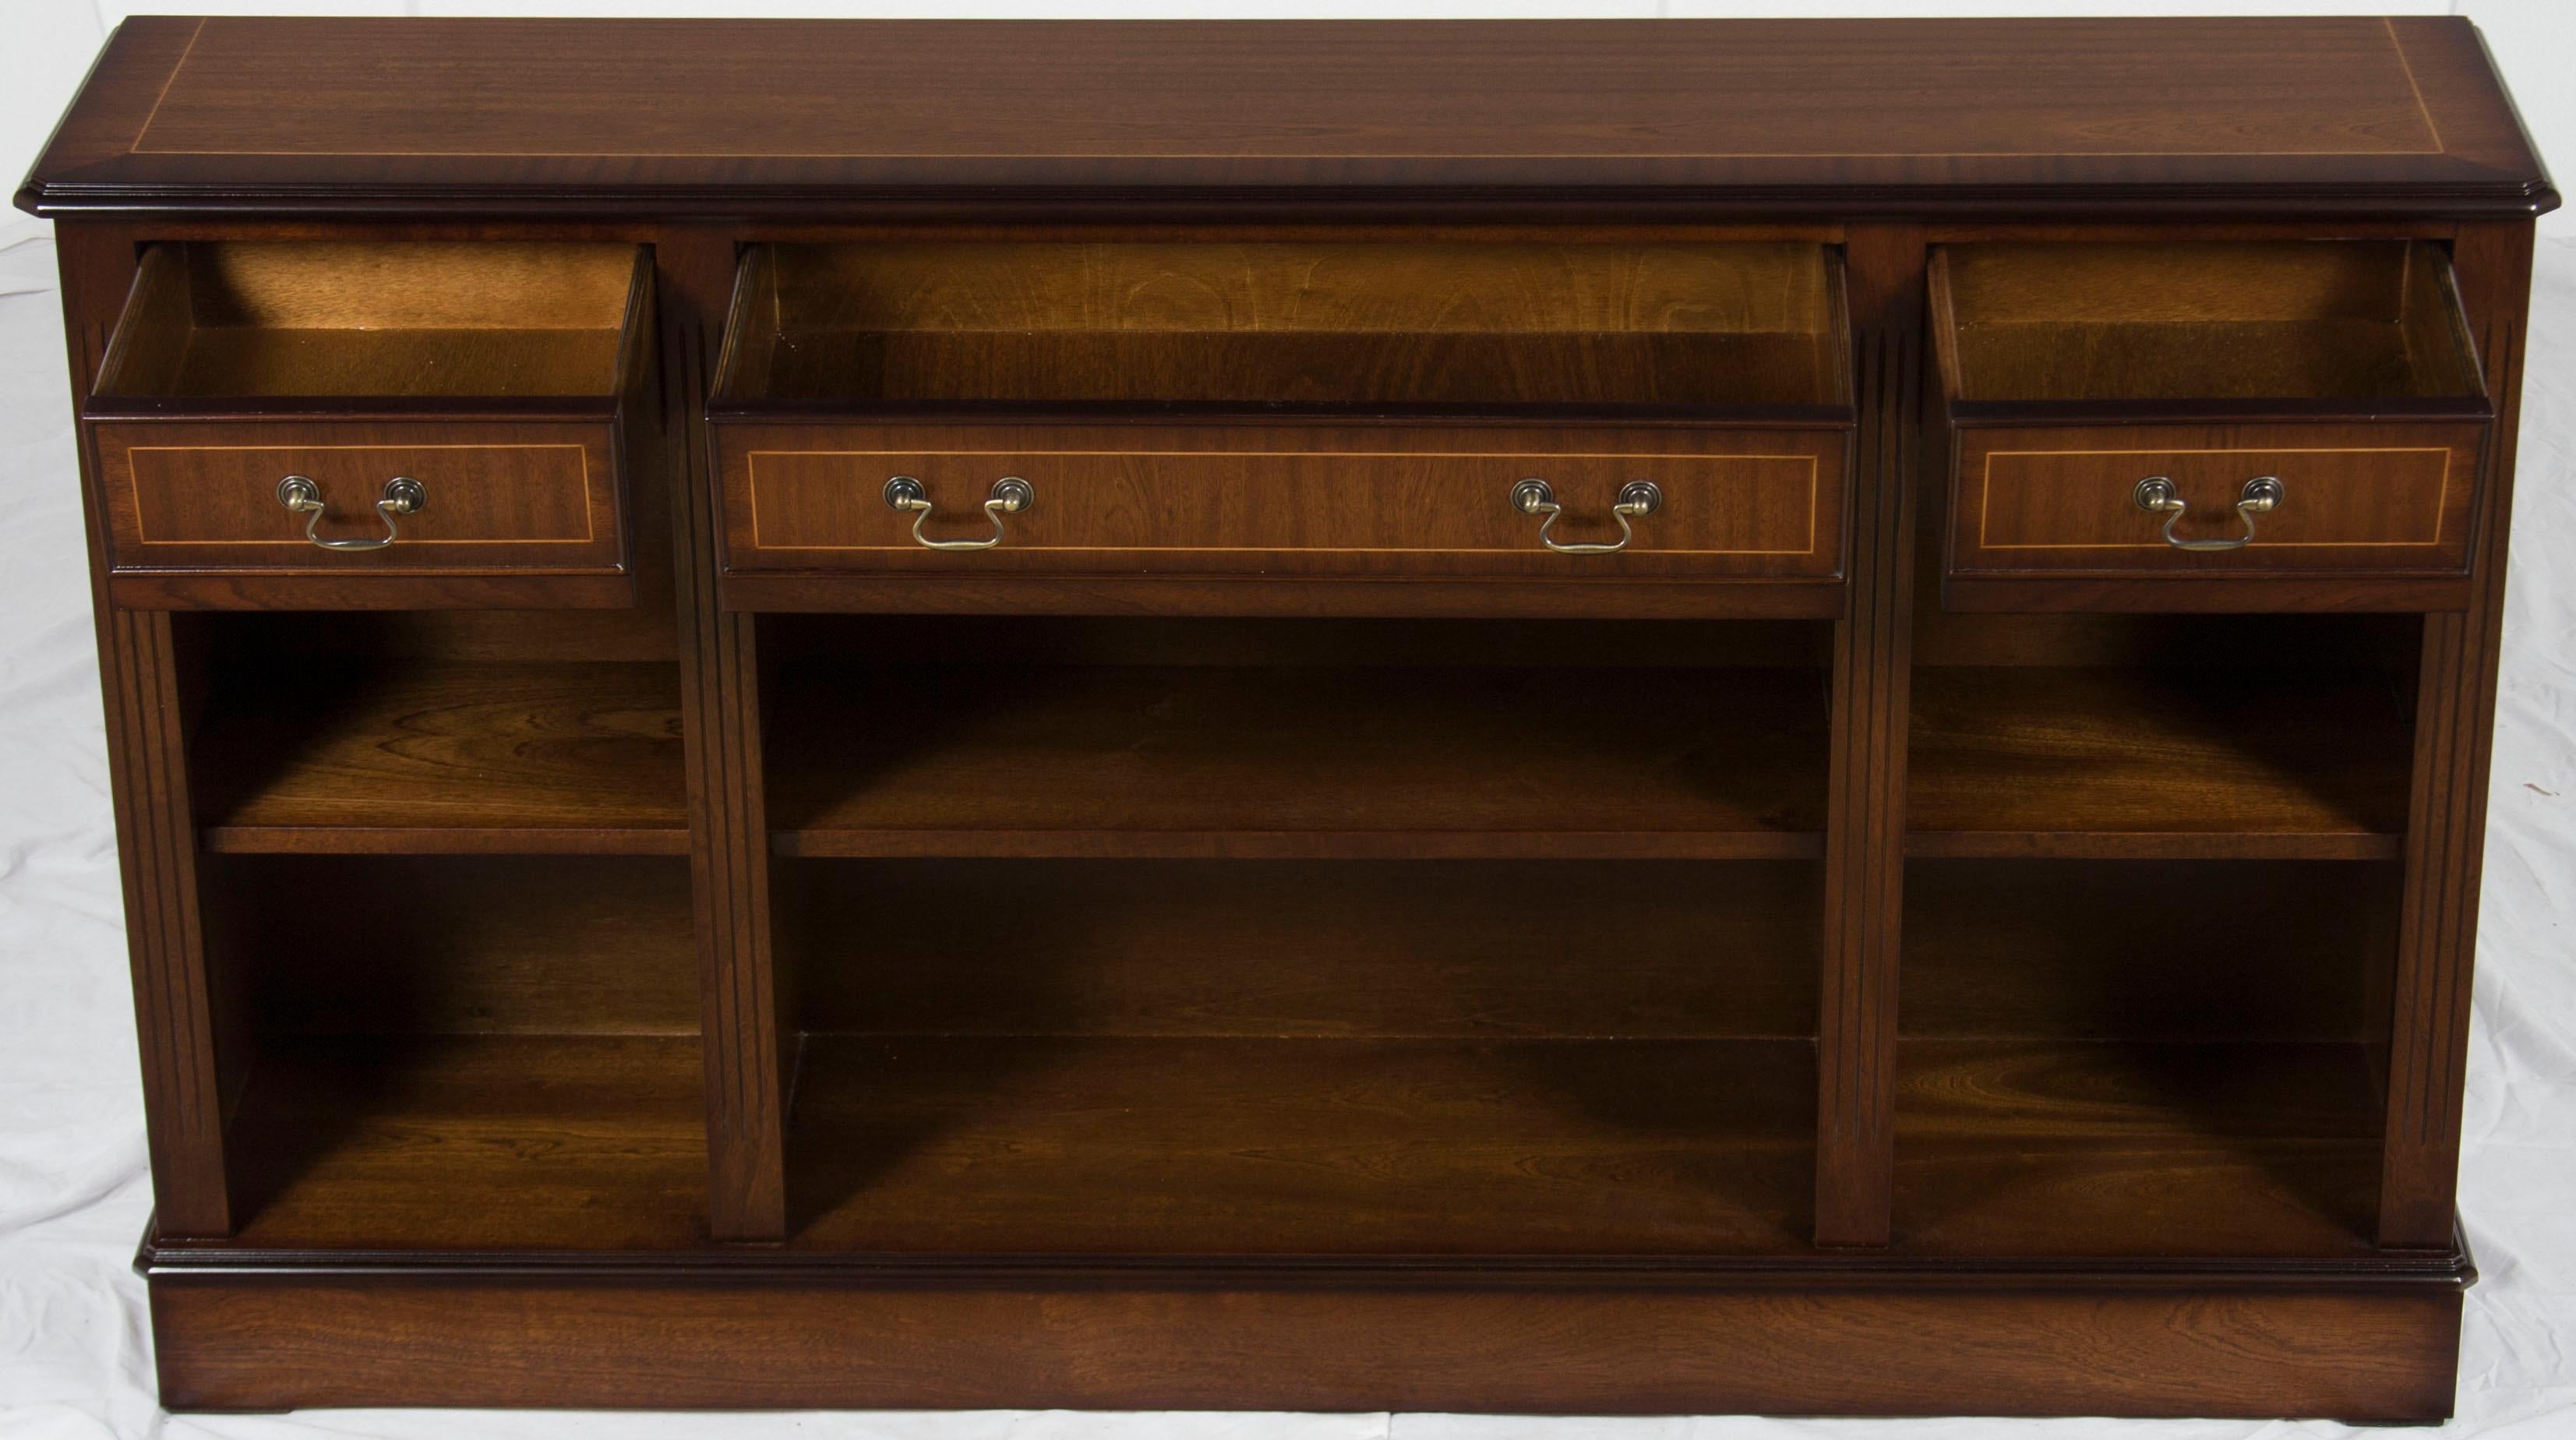 Here we have a very versatile and beautiful low bookcase with drawers that has lots of little details that make it special. It has the ability to function in any room of the house for traditional book storage, media storage, or decorative